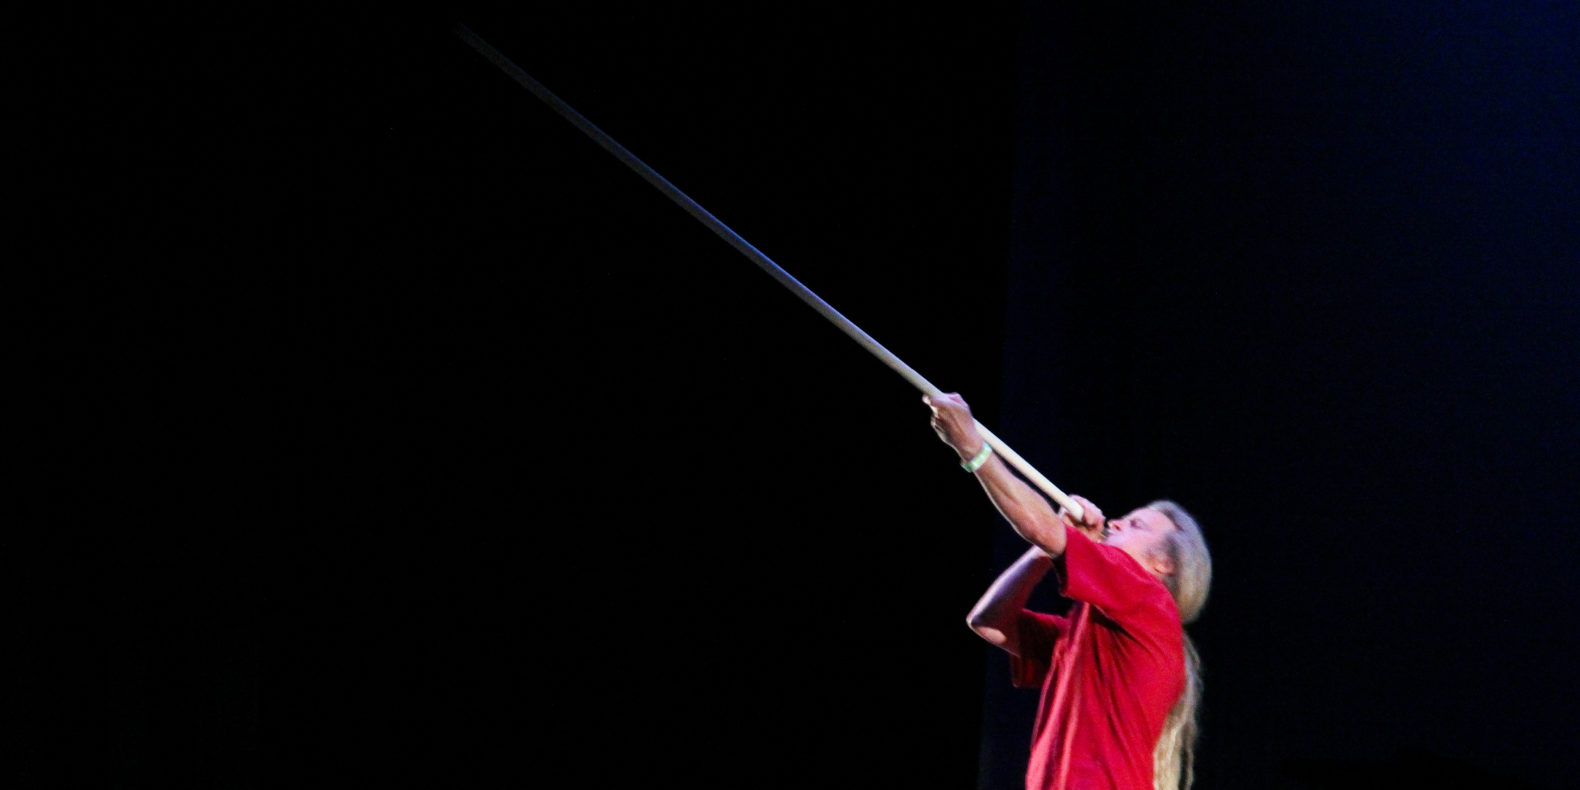 Man in red shirt blowing into long horn on stage